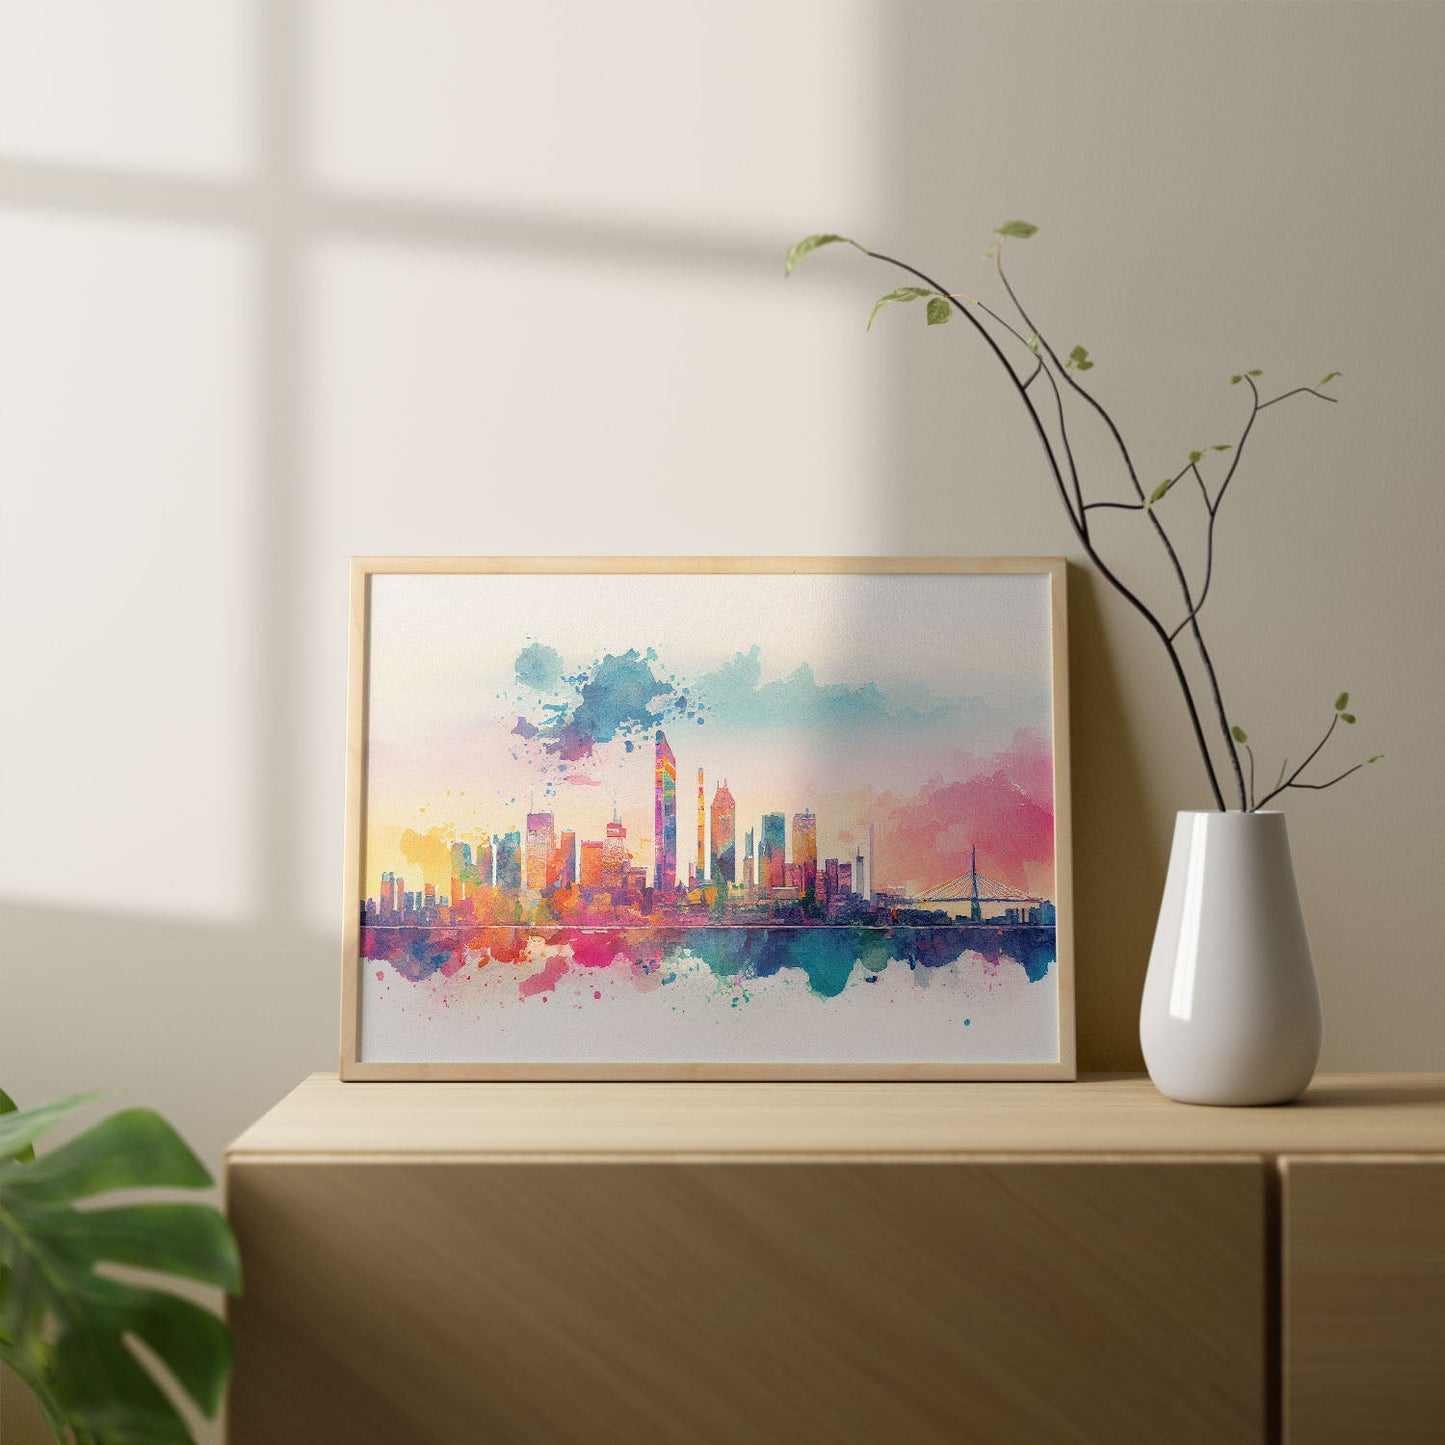 Nacnic watercolor of a skyline of the city of Osaka. Aesthetic Wall Art Prints for Bedroom or Living Room Design.